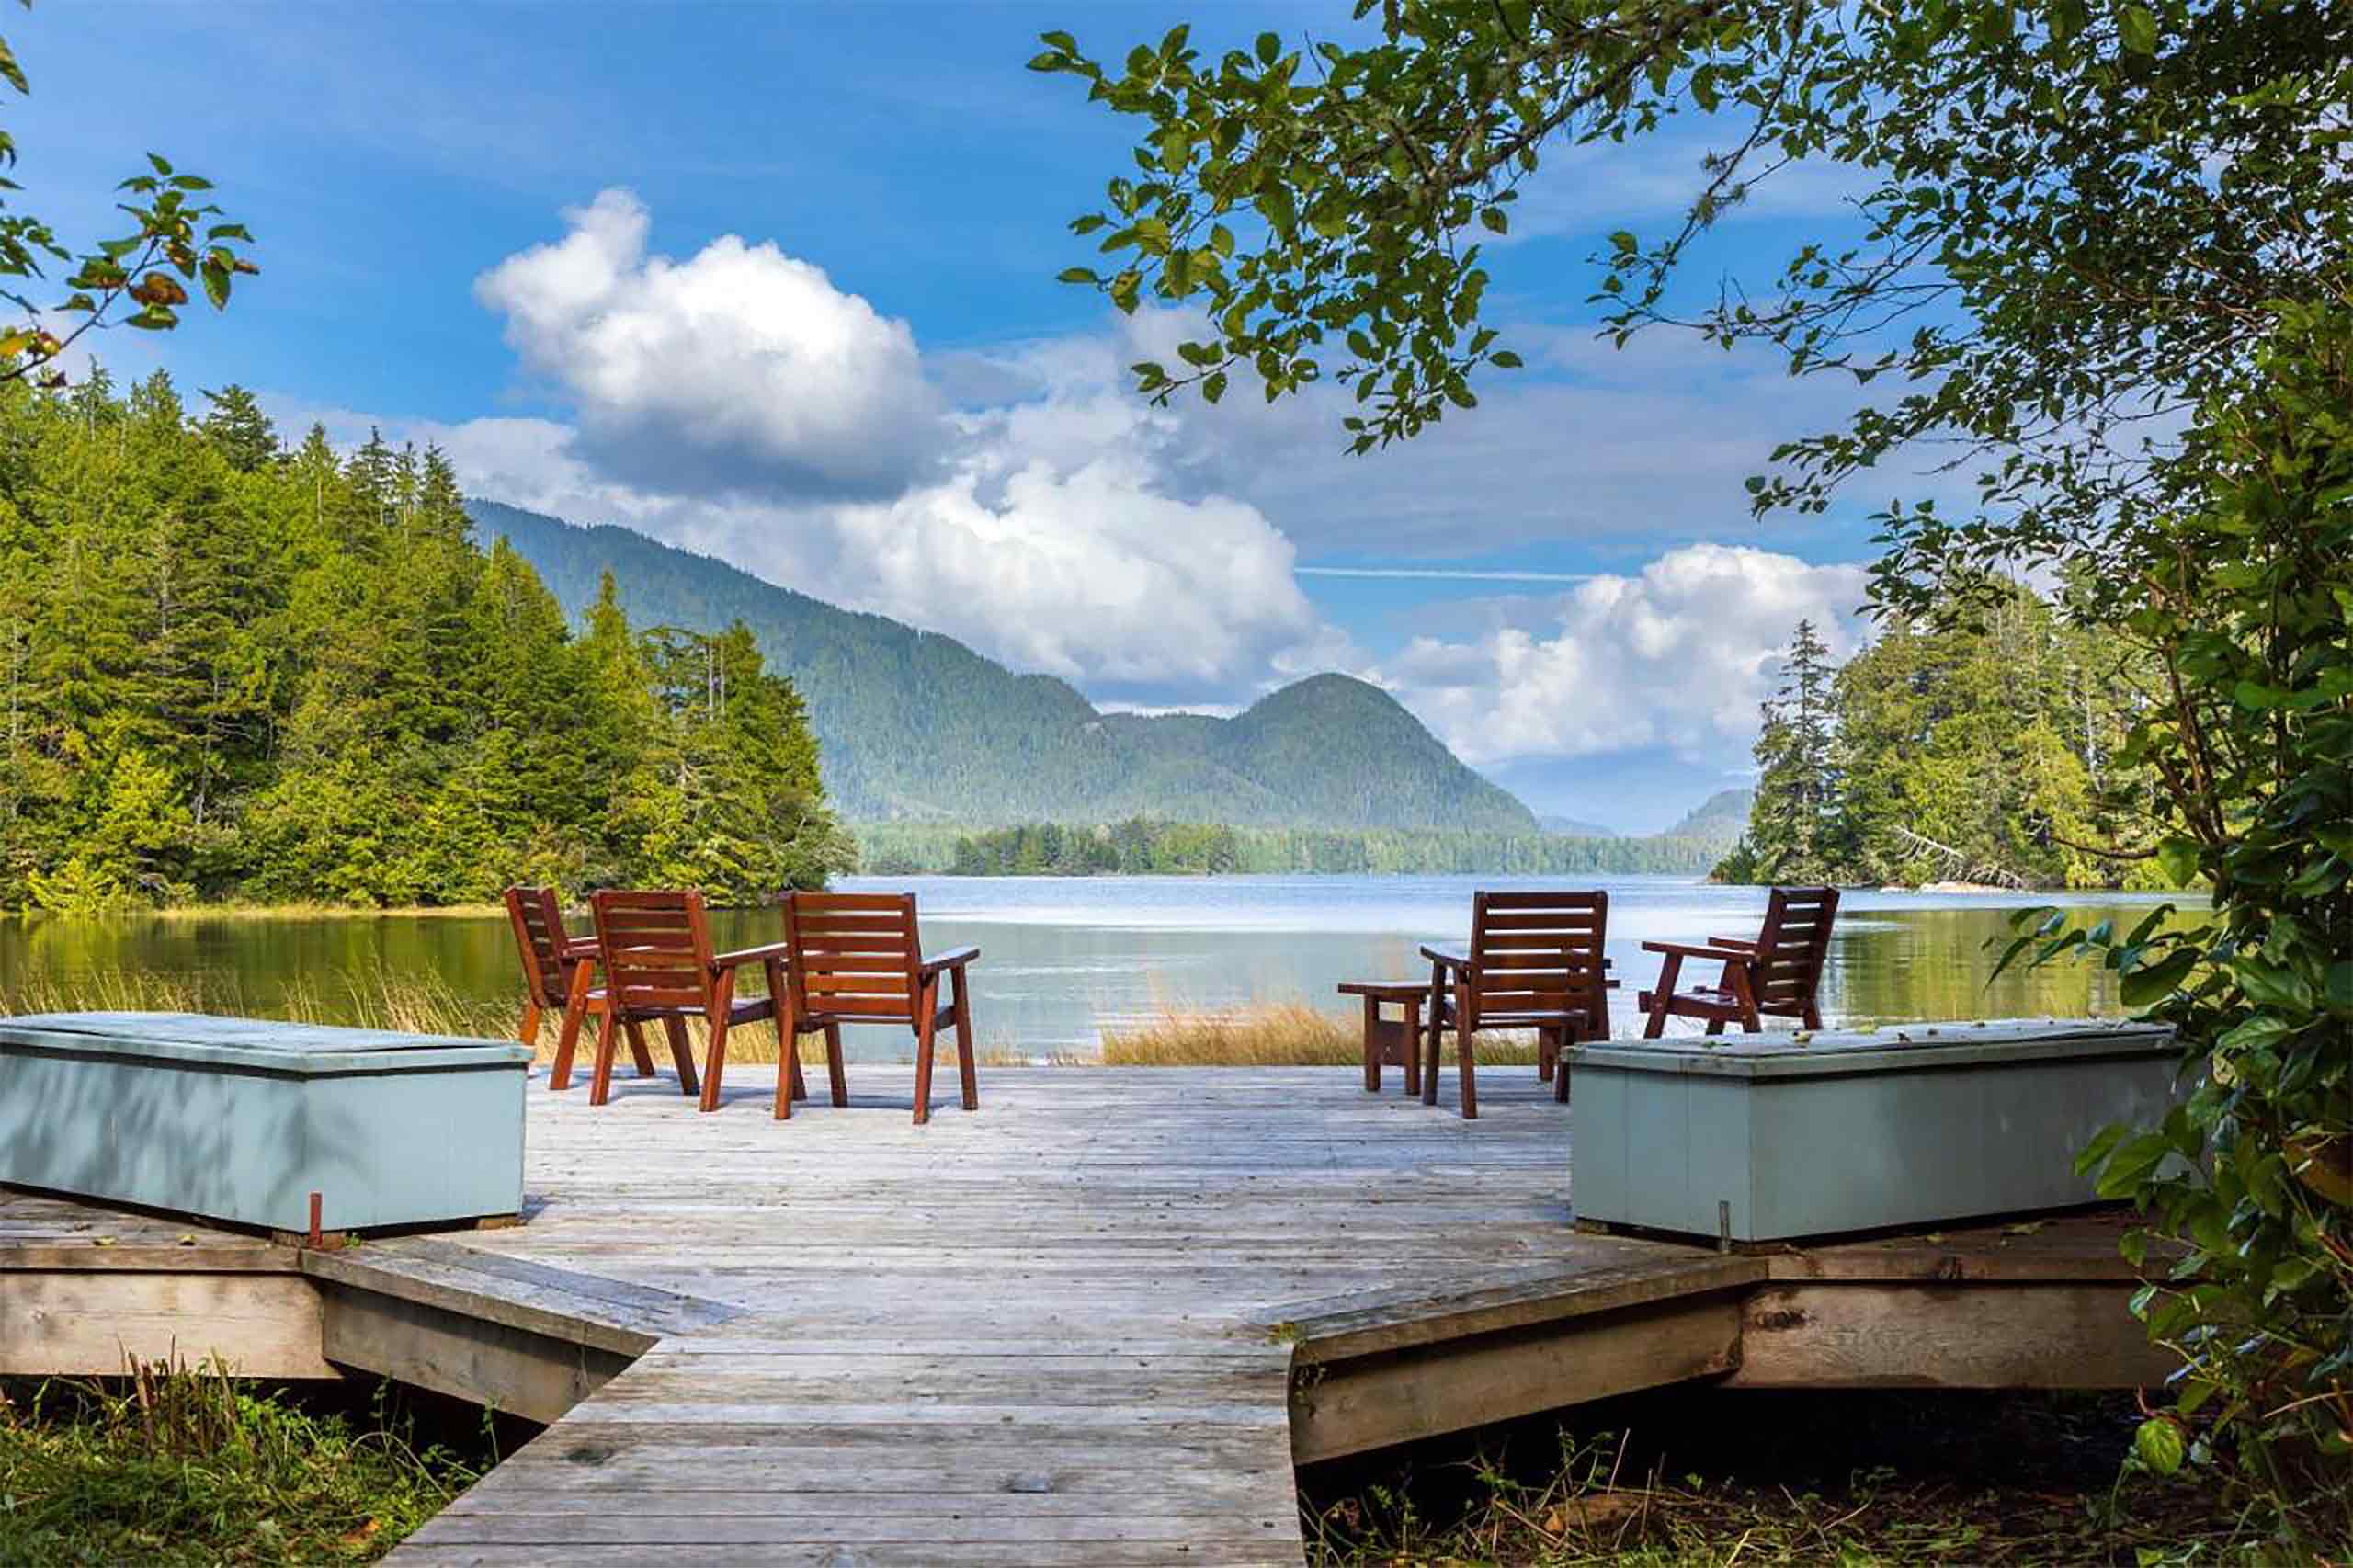 Outdoor seating with view over the landscape at Hotel Zed Tofino, Tofino, Vancouver Island, Canada